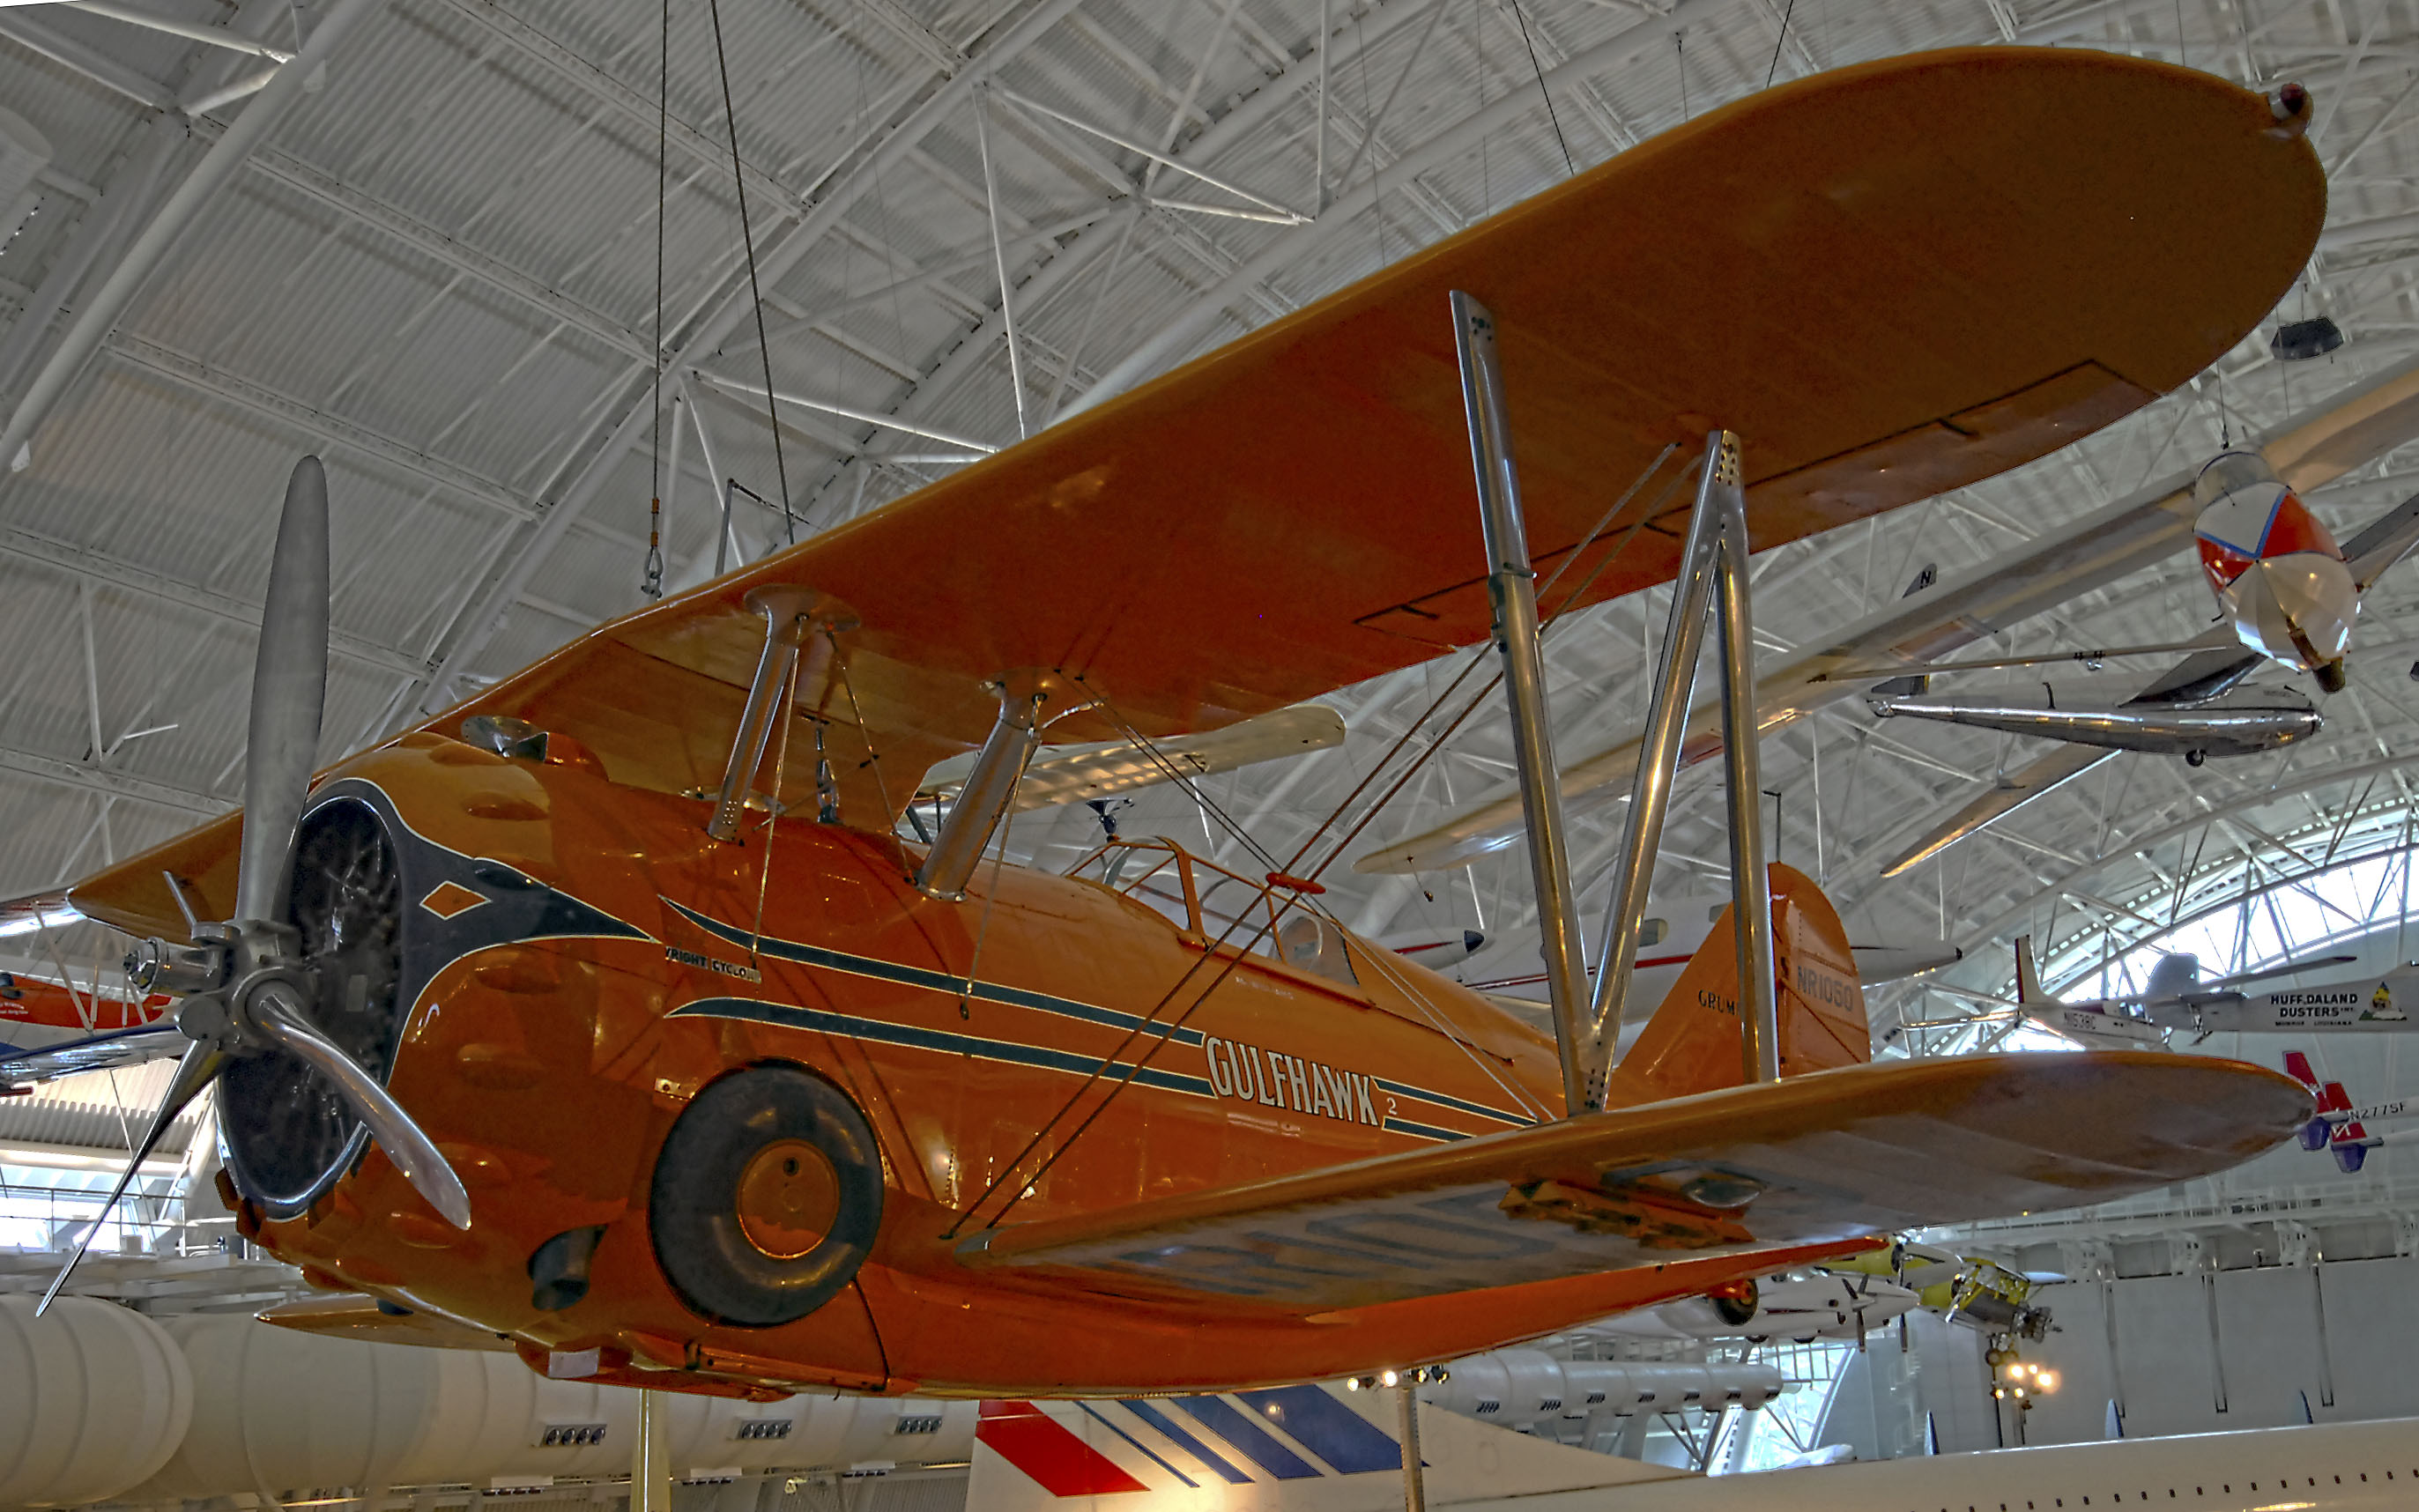 Aviation History | History of Flight | Aviation History Articles, Warbirds, Bombers, Trainers, Pilots | The Grumman F3F: The Last Biplane Fighter